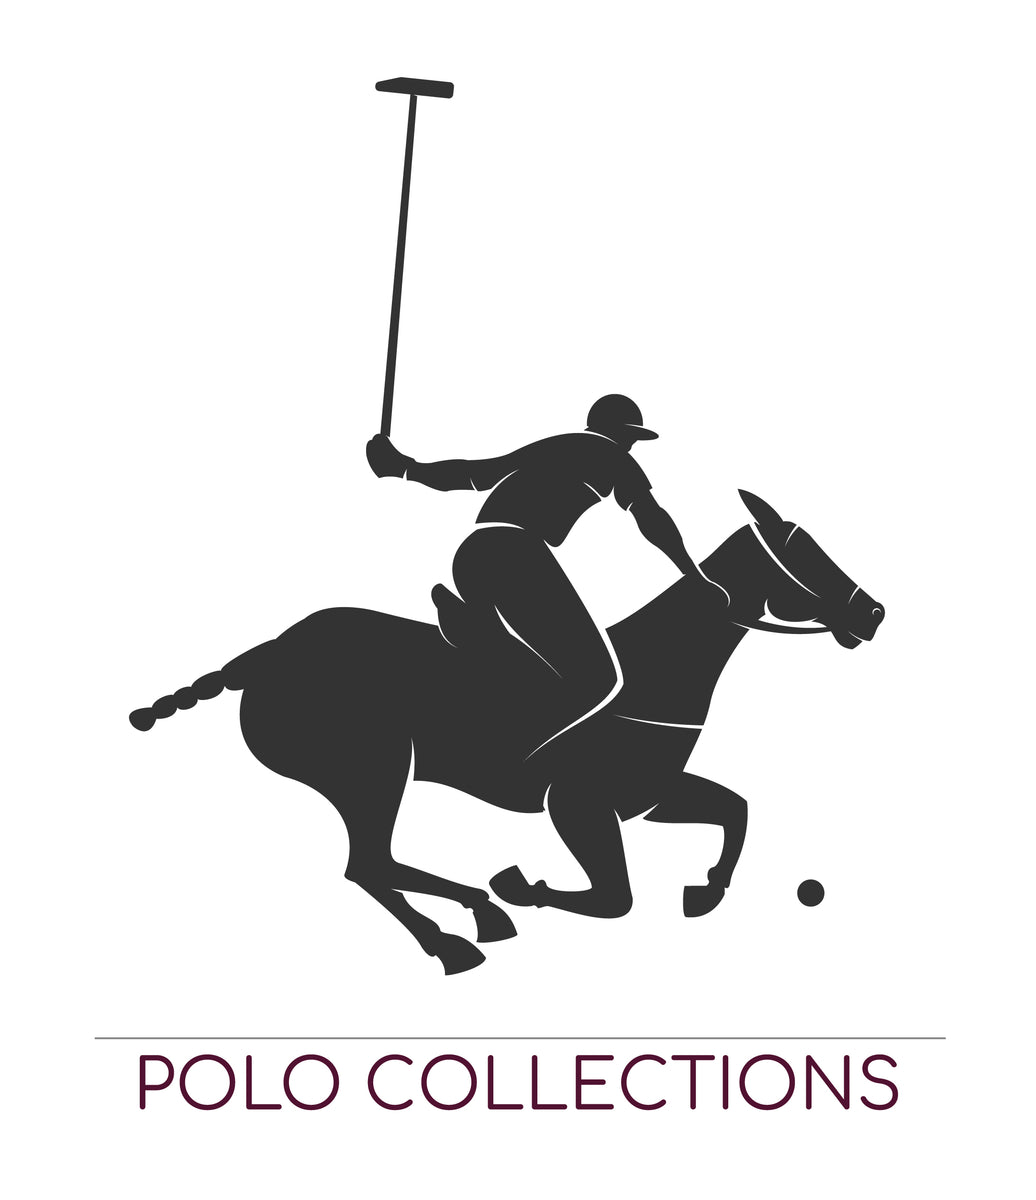 POLO COLLECTIONS